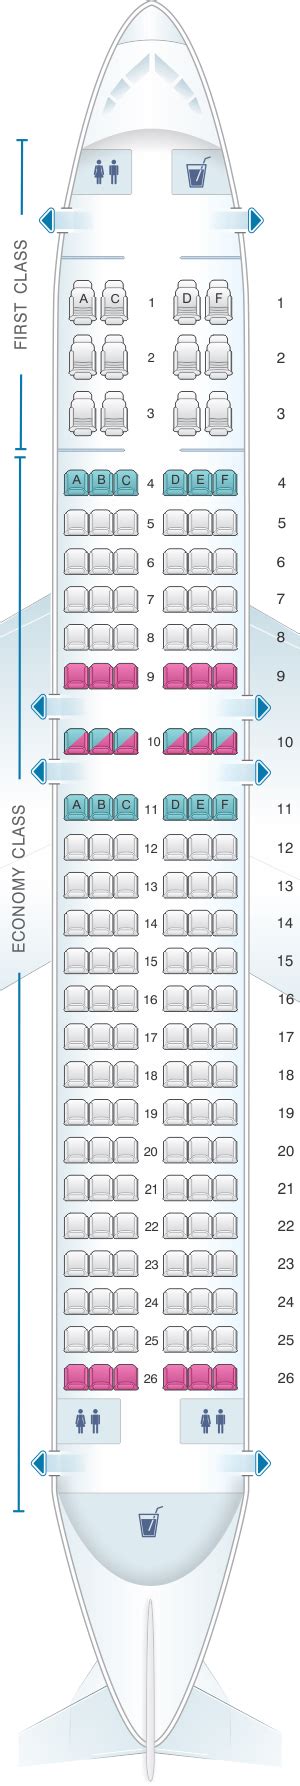 Airbus a320 seat map american airlines. Flat Bed Business (Rows 1-7) Standard Economy (Rows 10-43) View map. Boeing 777-300ER (77W) Qsuite Layout. Closed Suite Business (Rows 1-11) Standard Economy (Rows 16-48) View map. For your next Qatar Airways flight, use this seating chart to get the most comfortable seats, legroom, and recline on . 